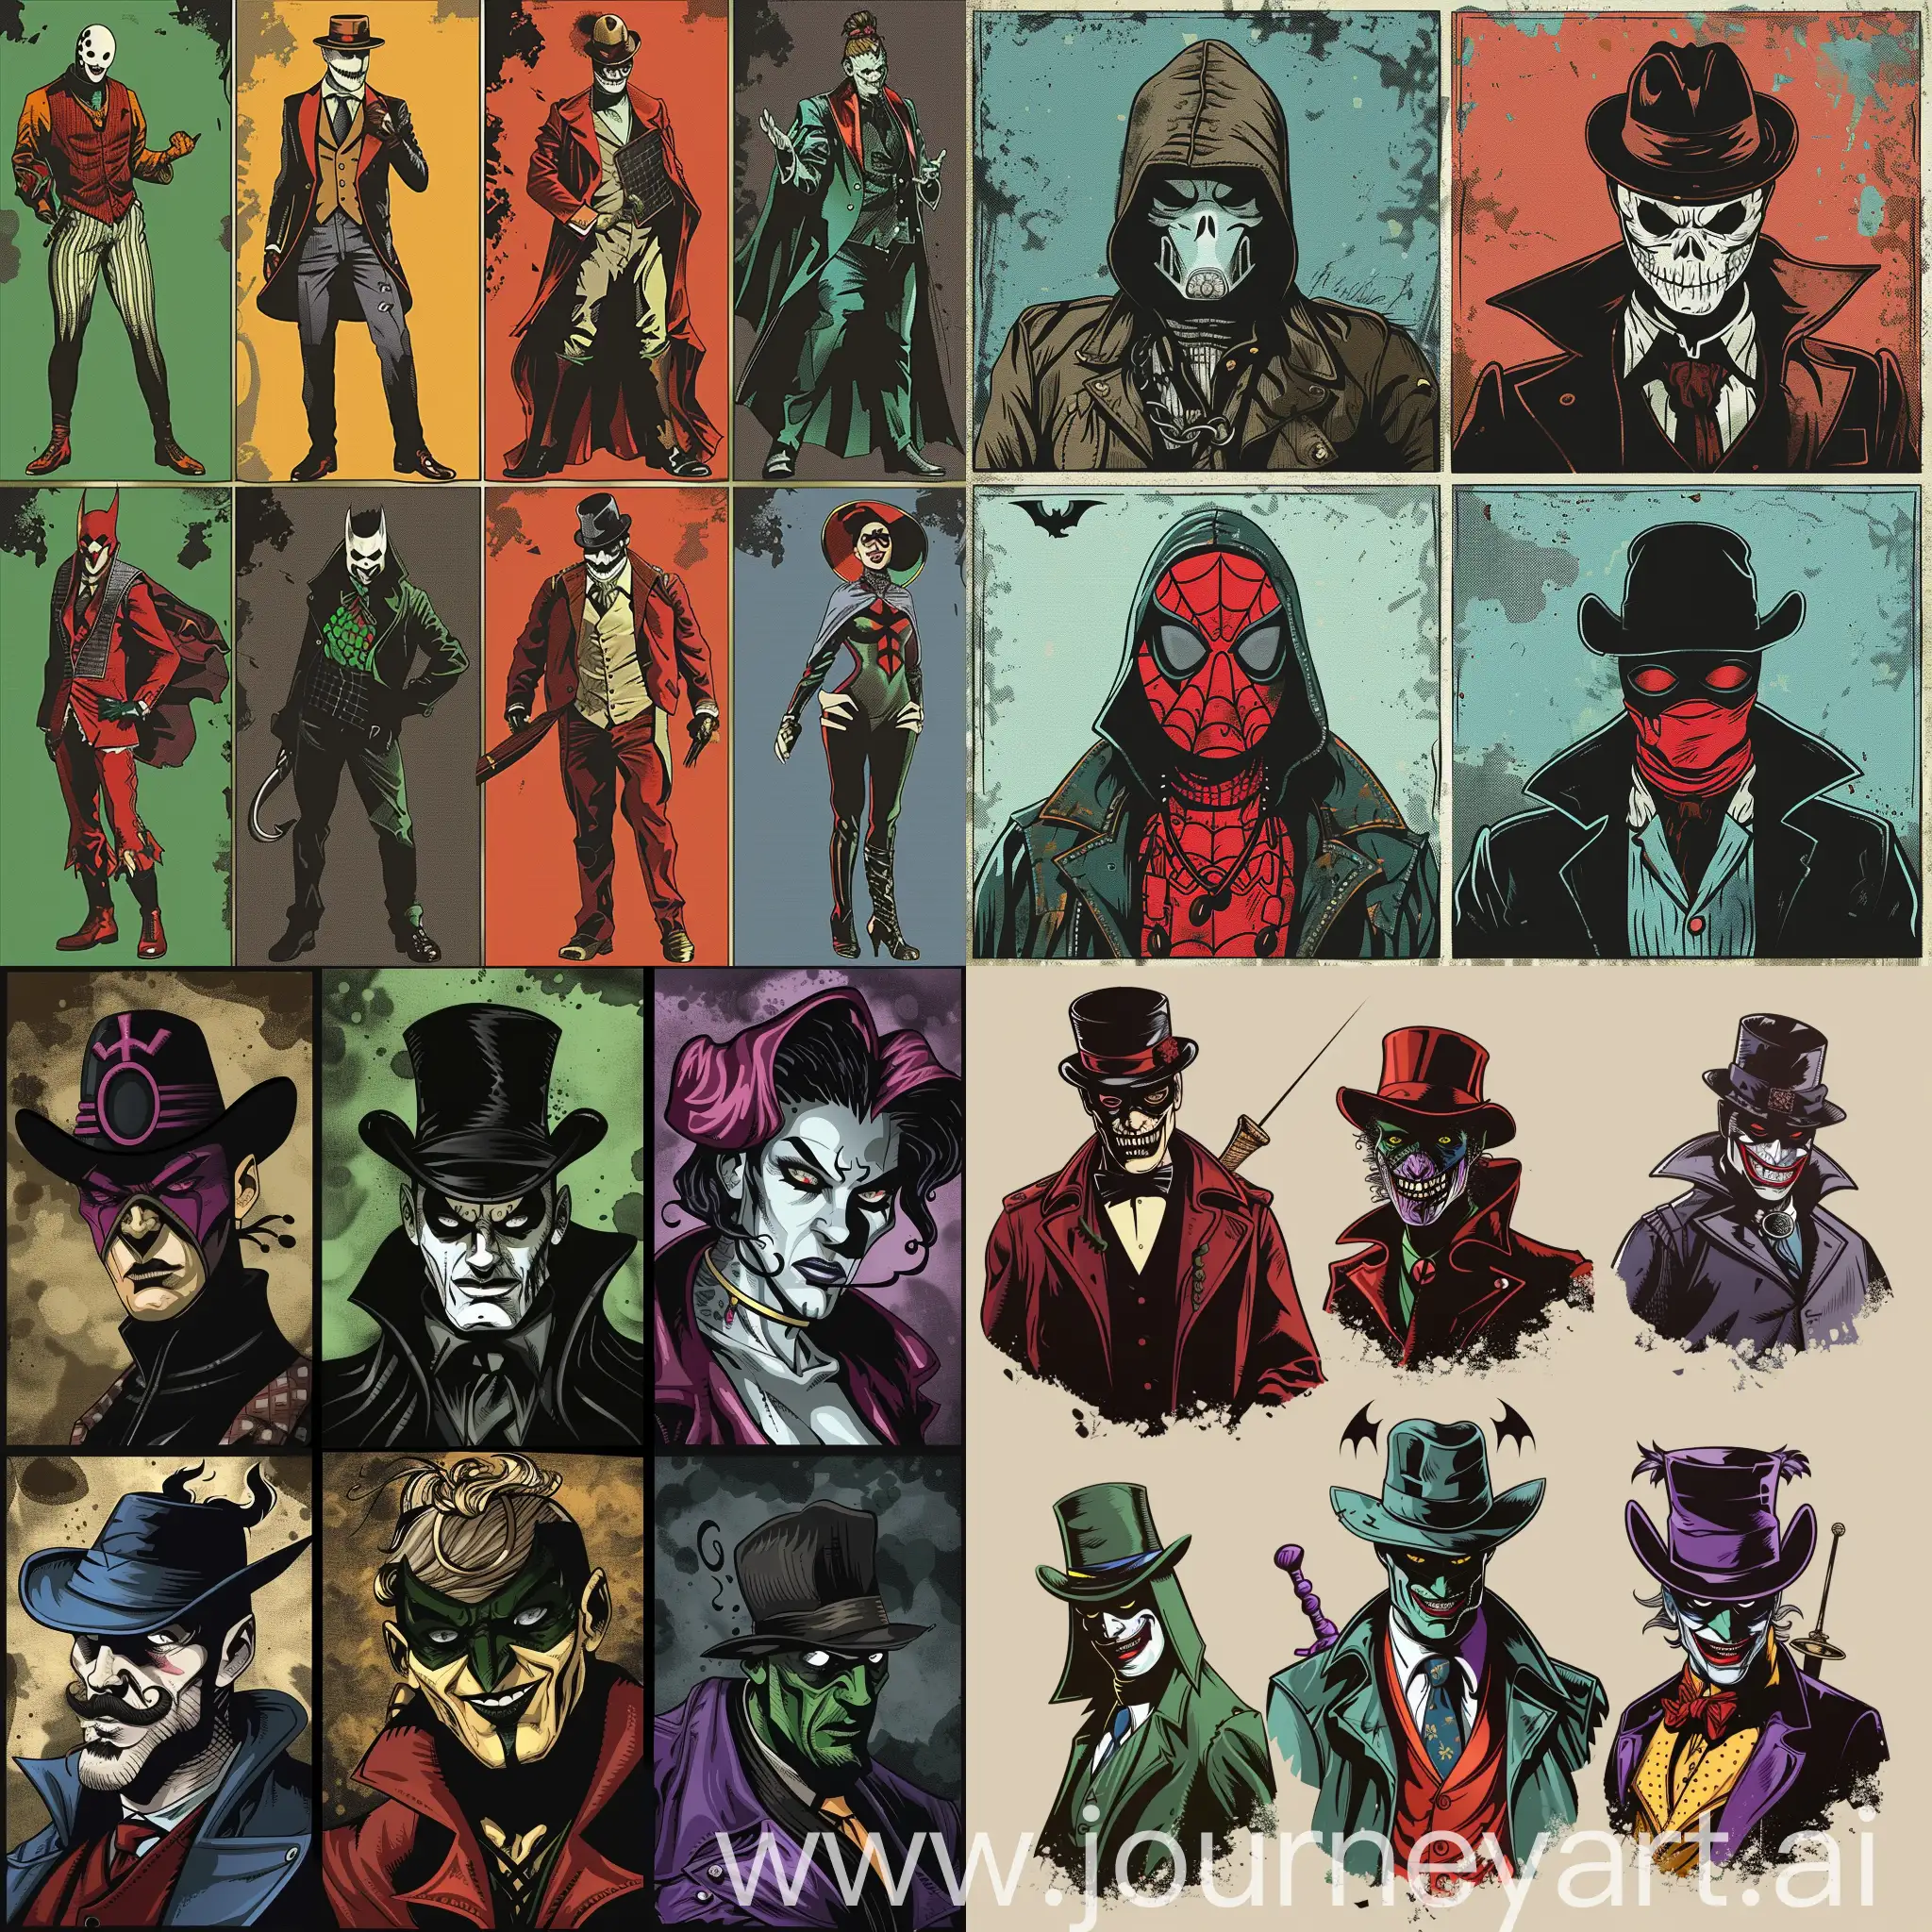 Unusual-Hero-and-Villain-Comic-Characters-in-Diverse-Styles-and-Costumes